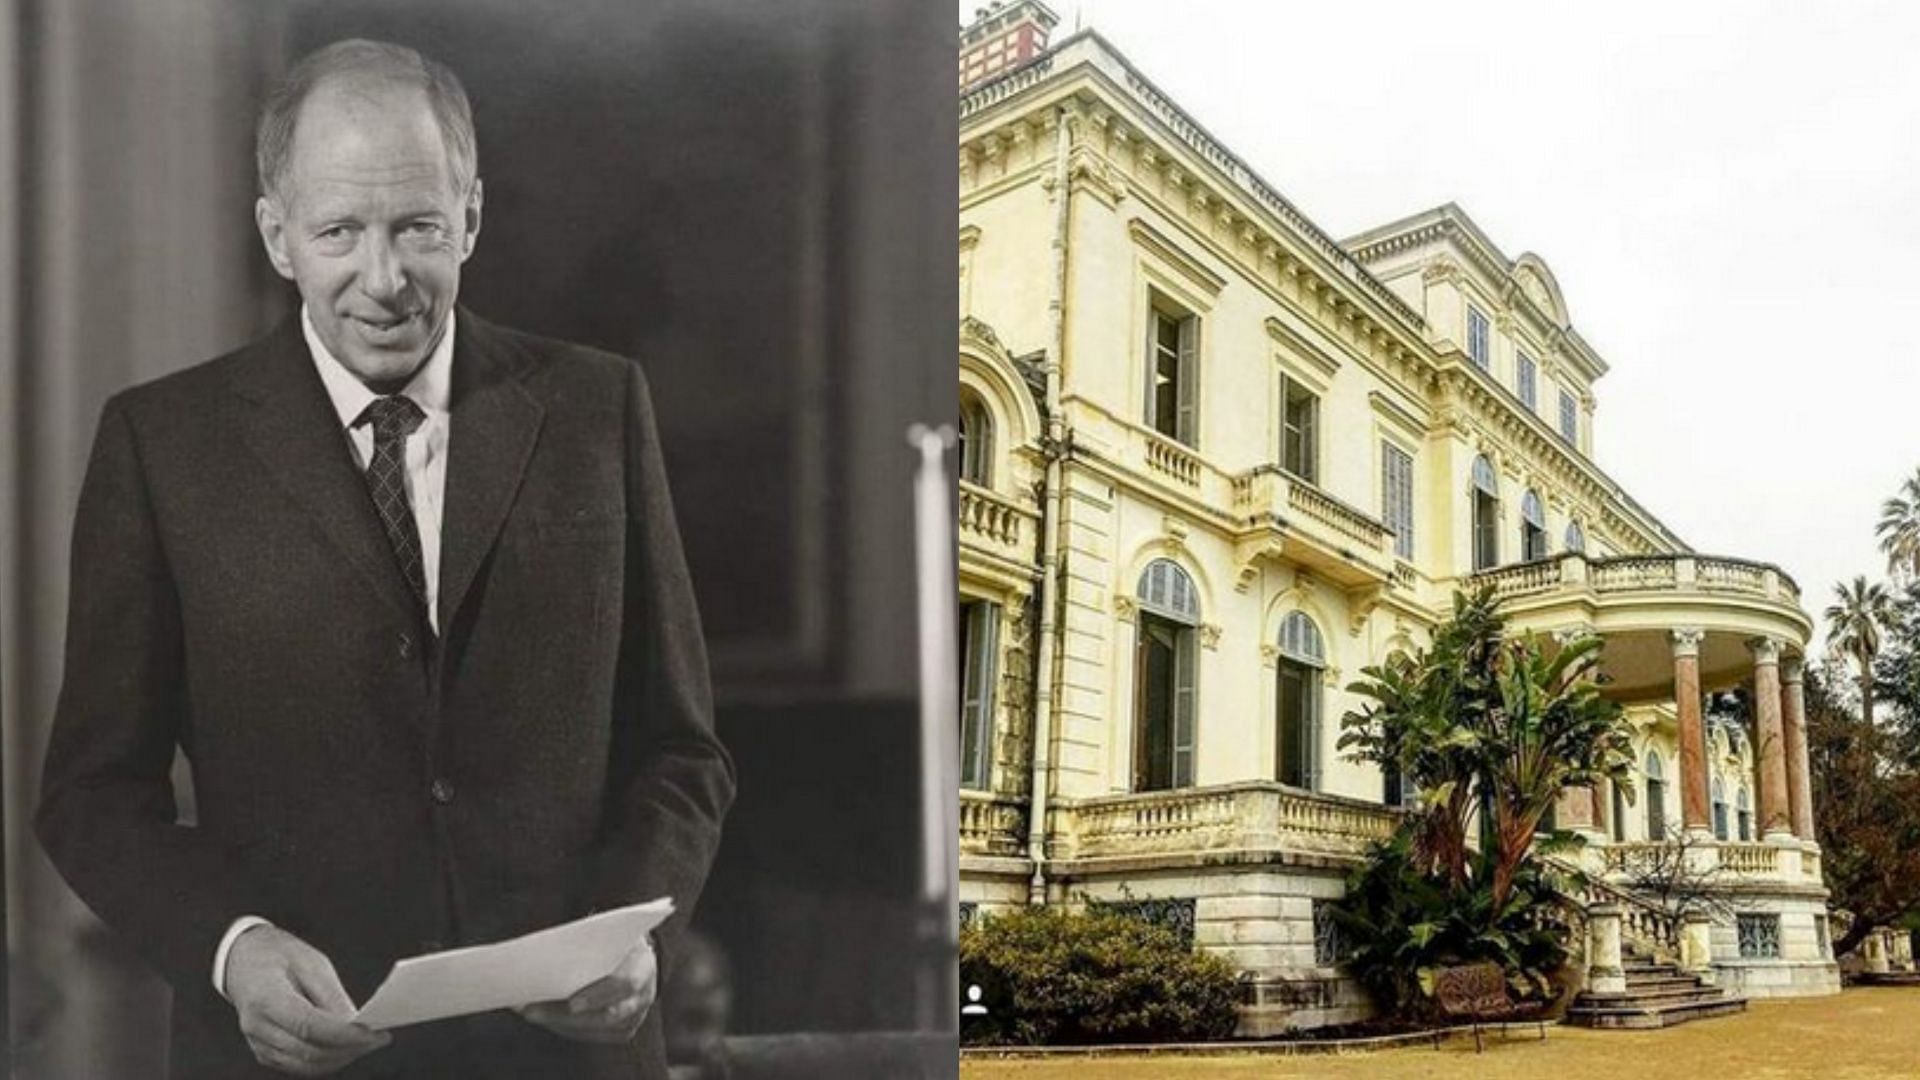 The Rothschild Family is one of the wealthiest families of the world (Image via Instagram / rothschild.family)